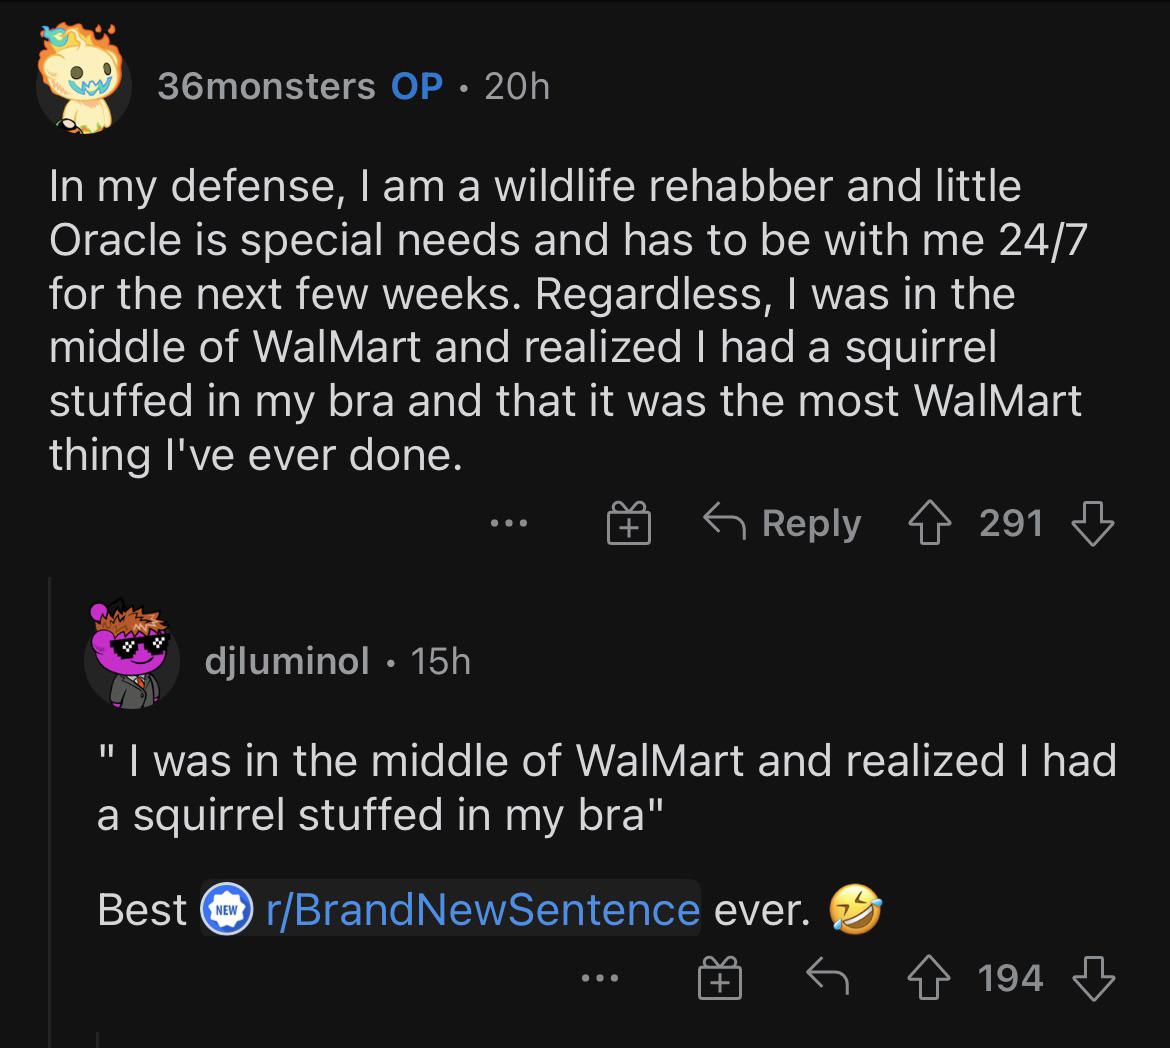 “I was in the middle of Walmart and realized I had a squirrel stuffed in my bra”